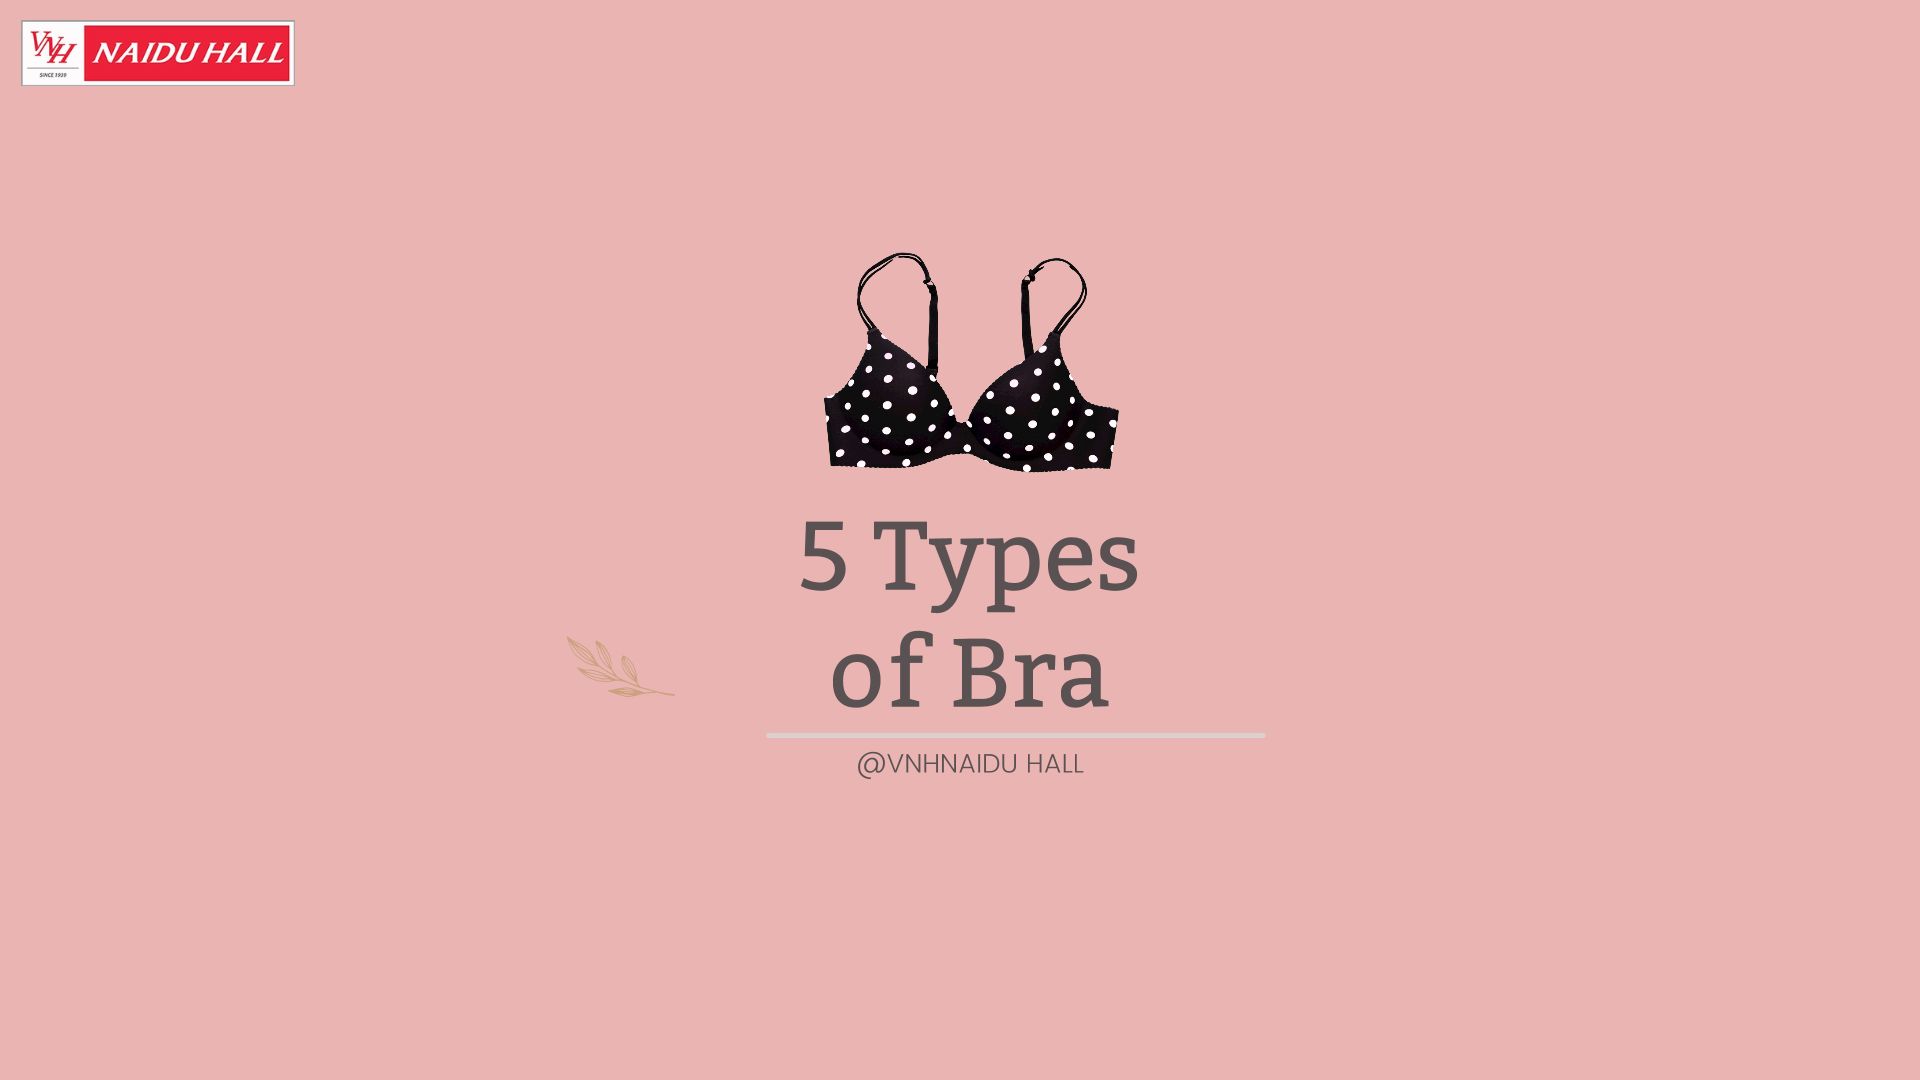 5 MUST HAVE BRAS TO ADD TO YOUR LINGERIE COLLECTION!